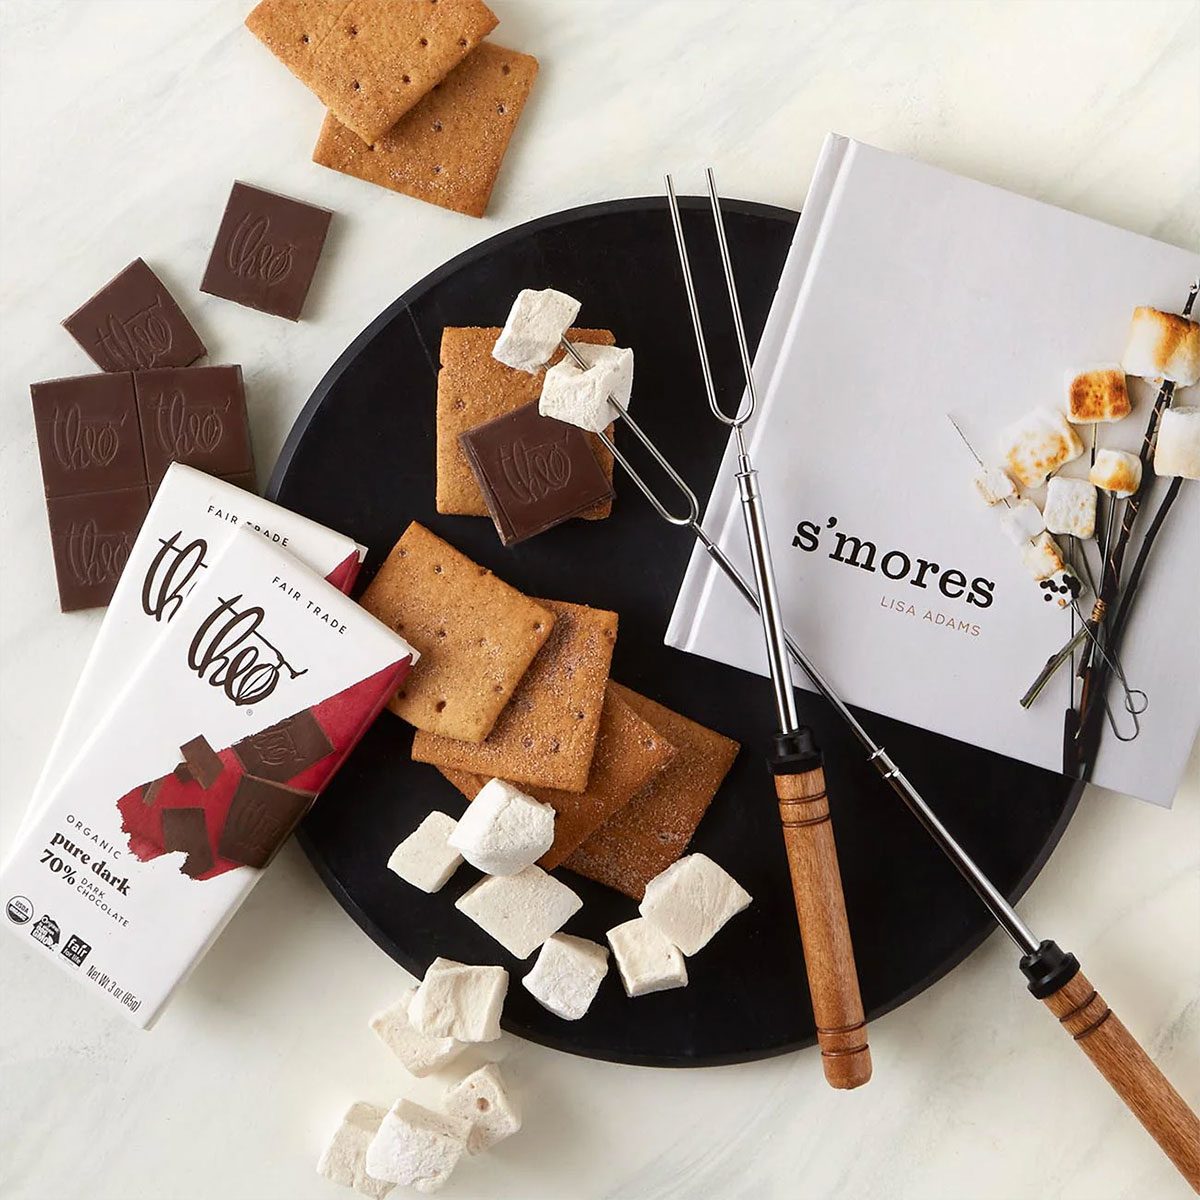 For The Happy Camper S'mores Gift Box